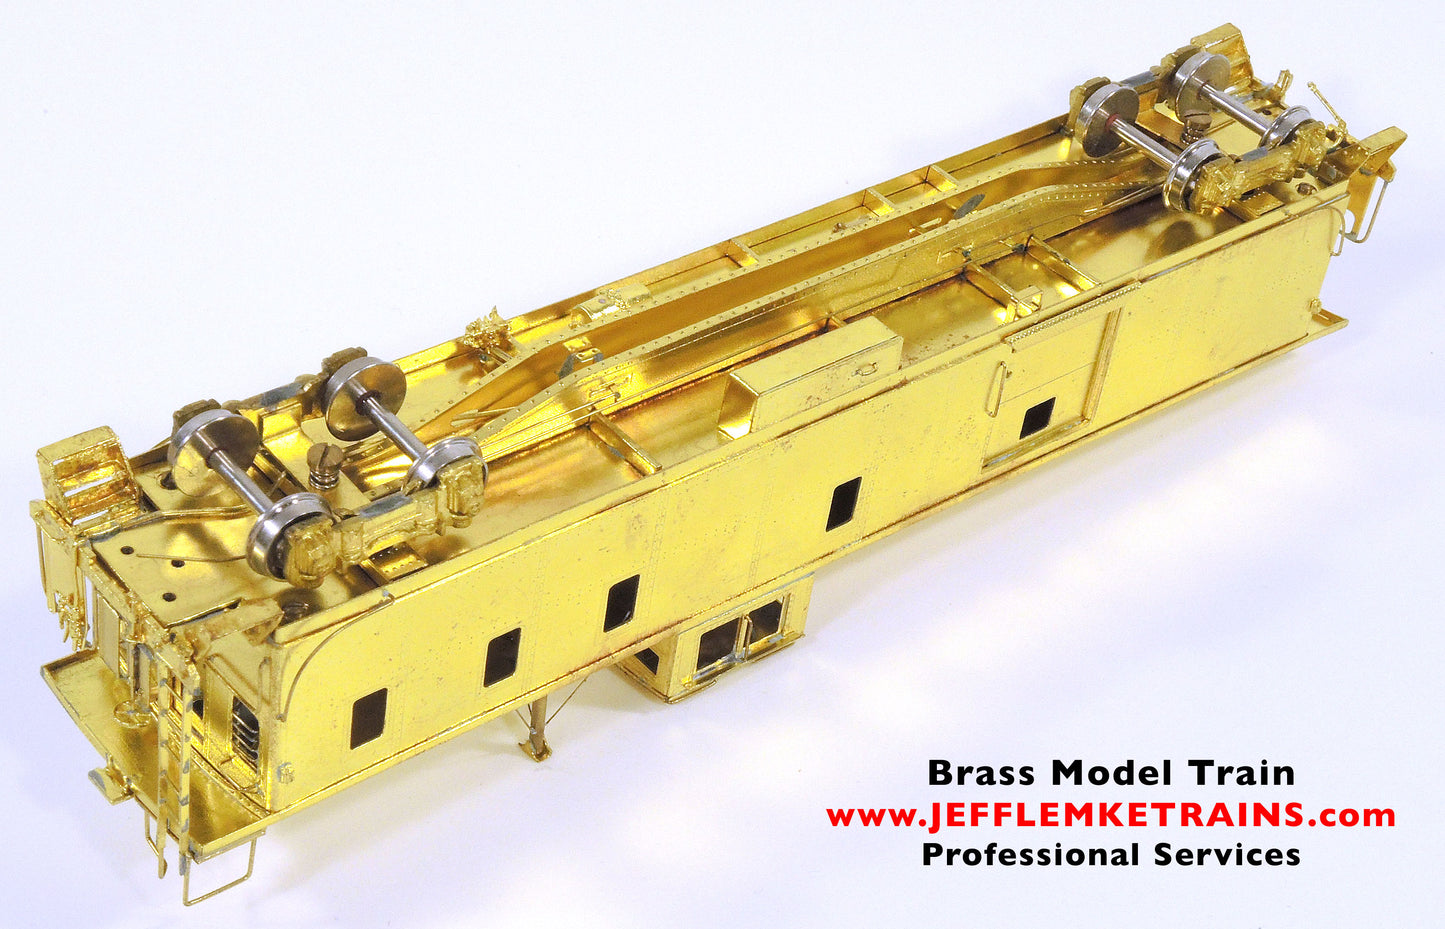 HO Scale Brass Overland Models OMI 1109 Great Northern Railway X-181 Caboose made by Ajin Precision of Korea 1980